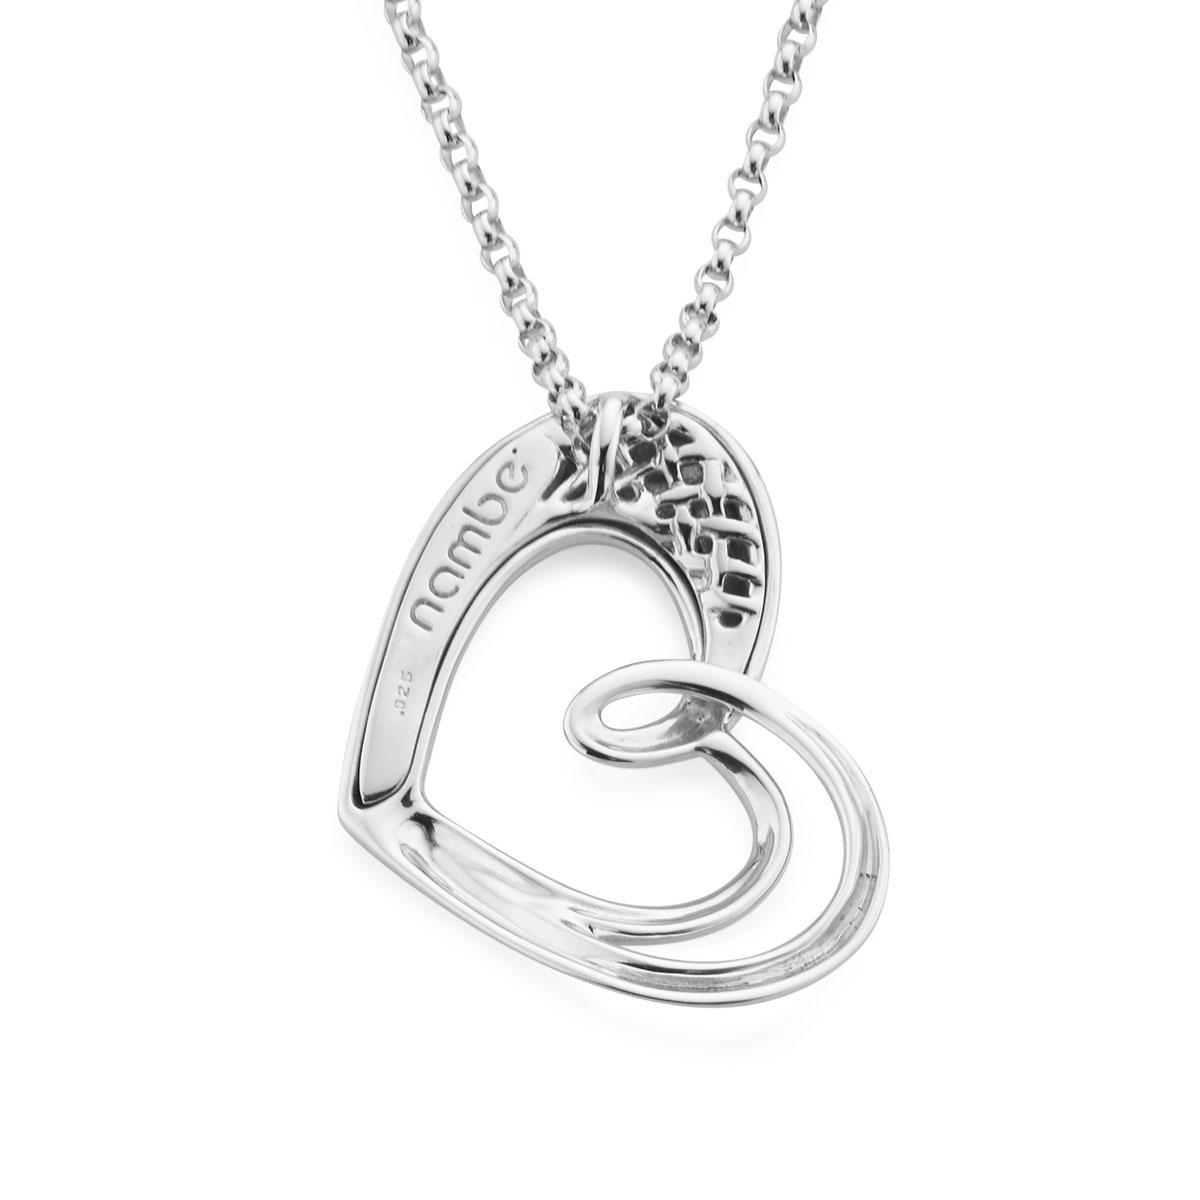 Nambe Jewelry Silver Heart Pendant Necklace